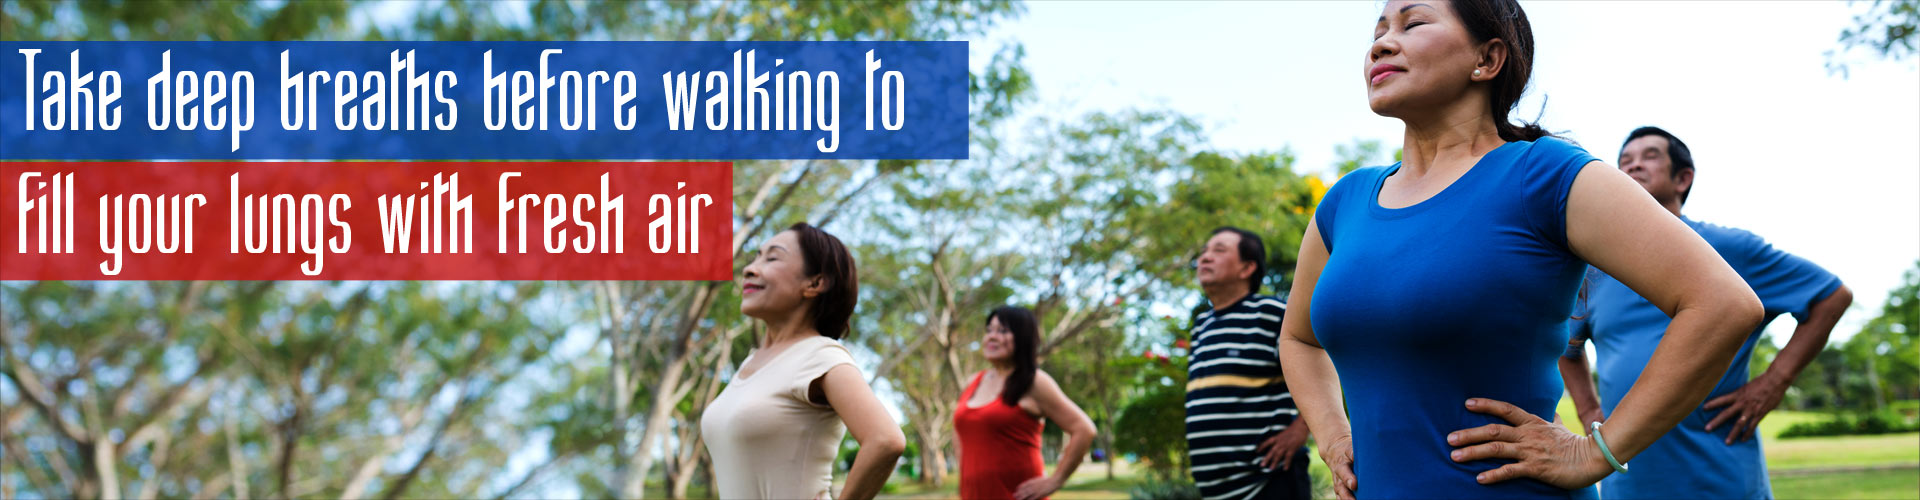 Take deep breaths before walking to fill your lungs with fresh air